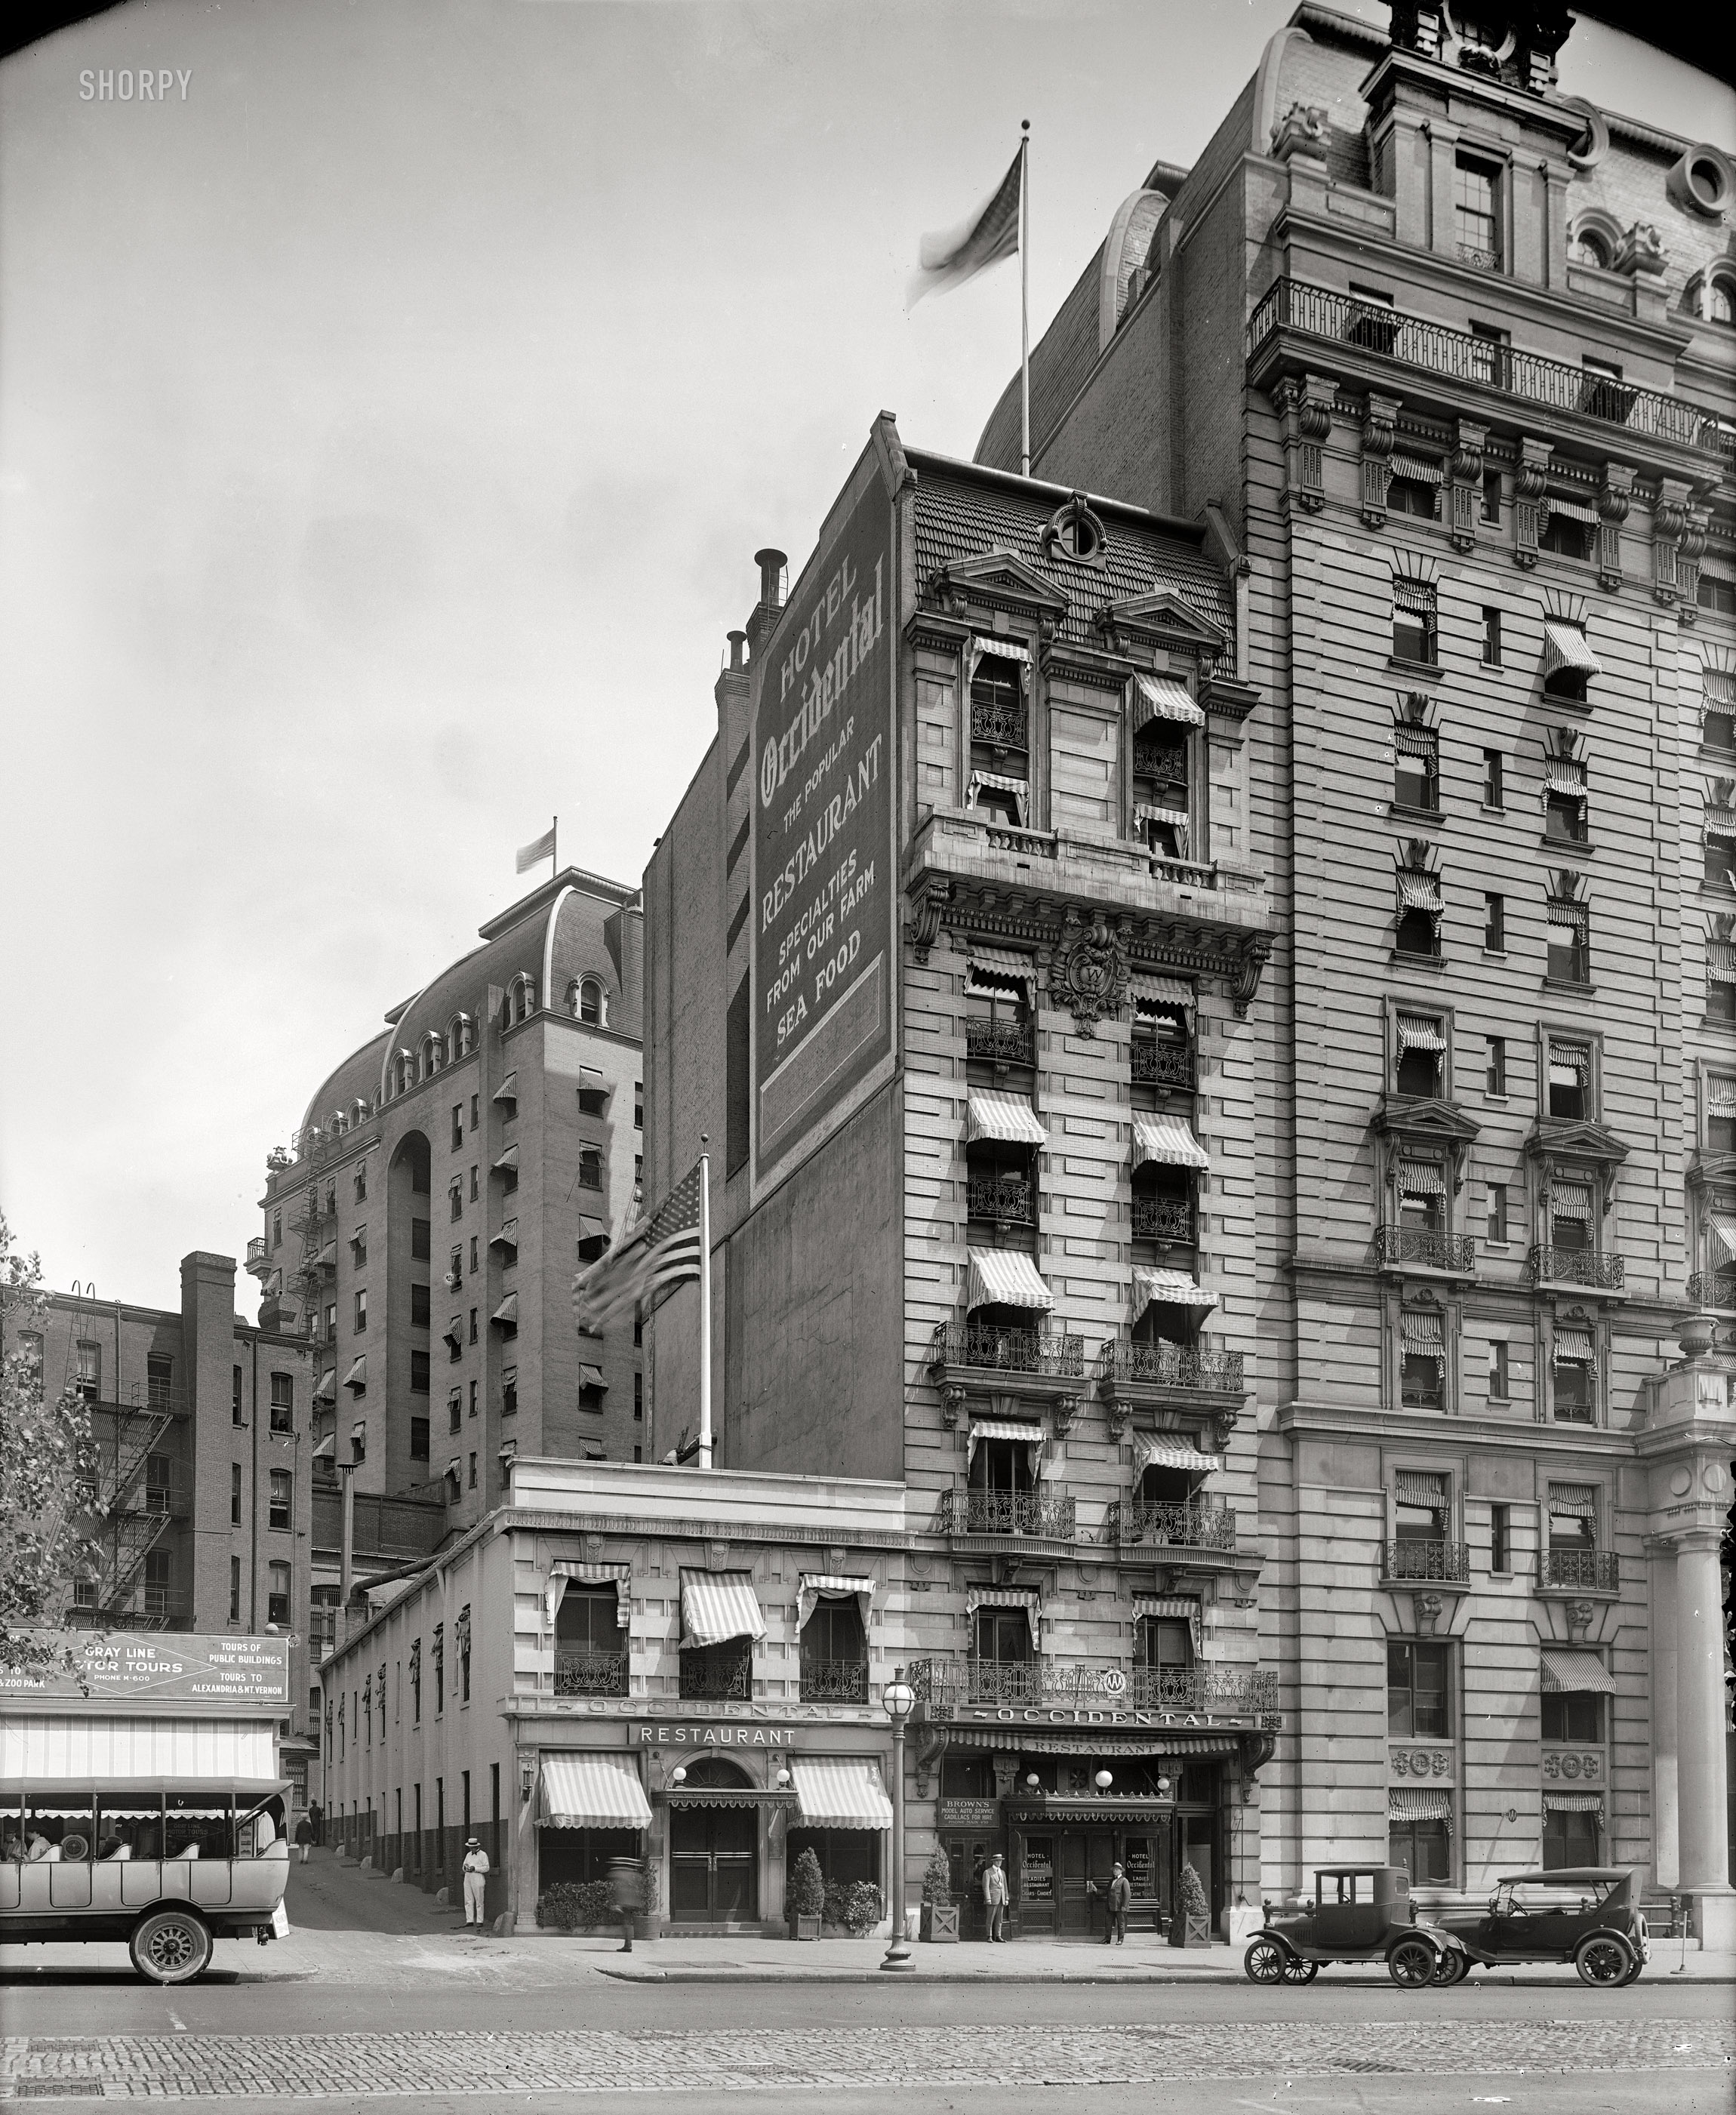 Washington, D.C., circa 1920. Gustav Buchholz's Occidental hotel and restaurant on Pennsylvania Avenue. Just out of frame to the left would be Childs' Restaurant, seen a few posts back. Rising on the right is the Willard Hotel. View full size.